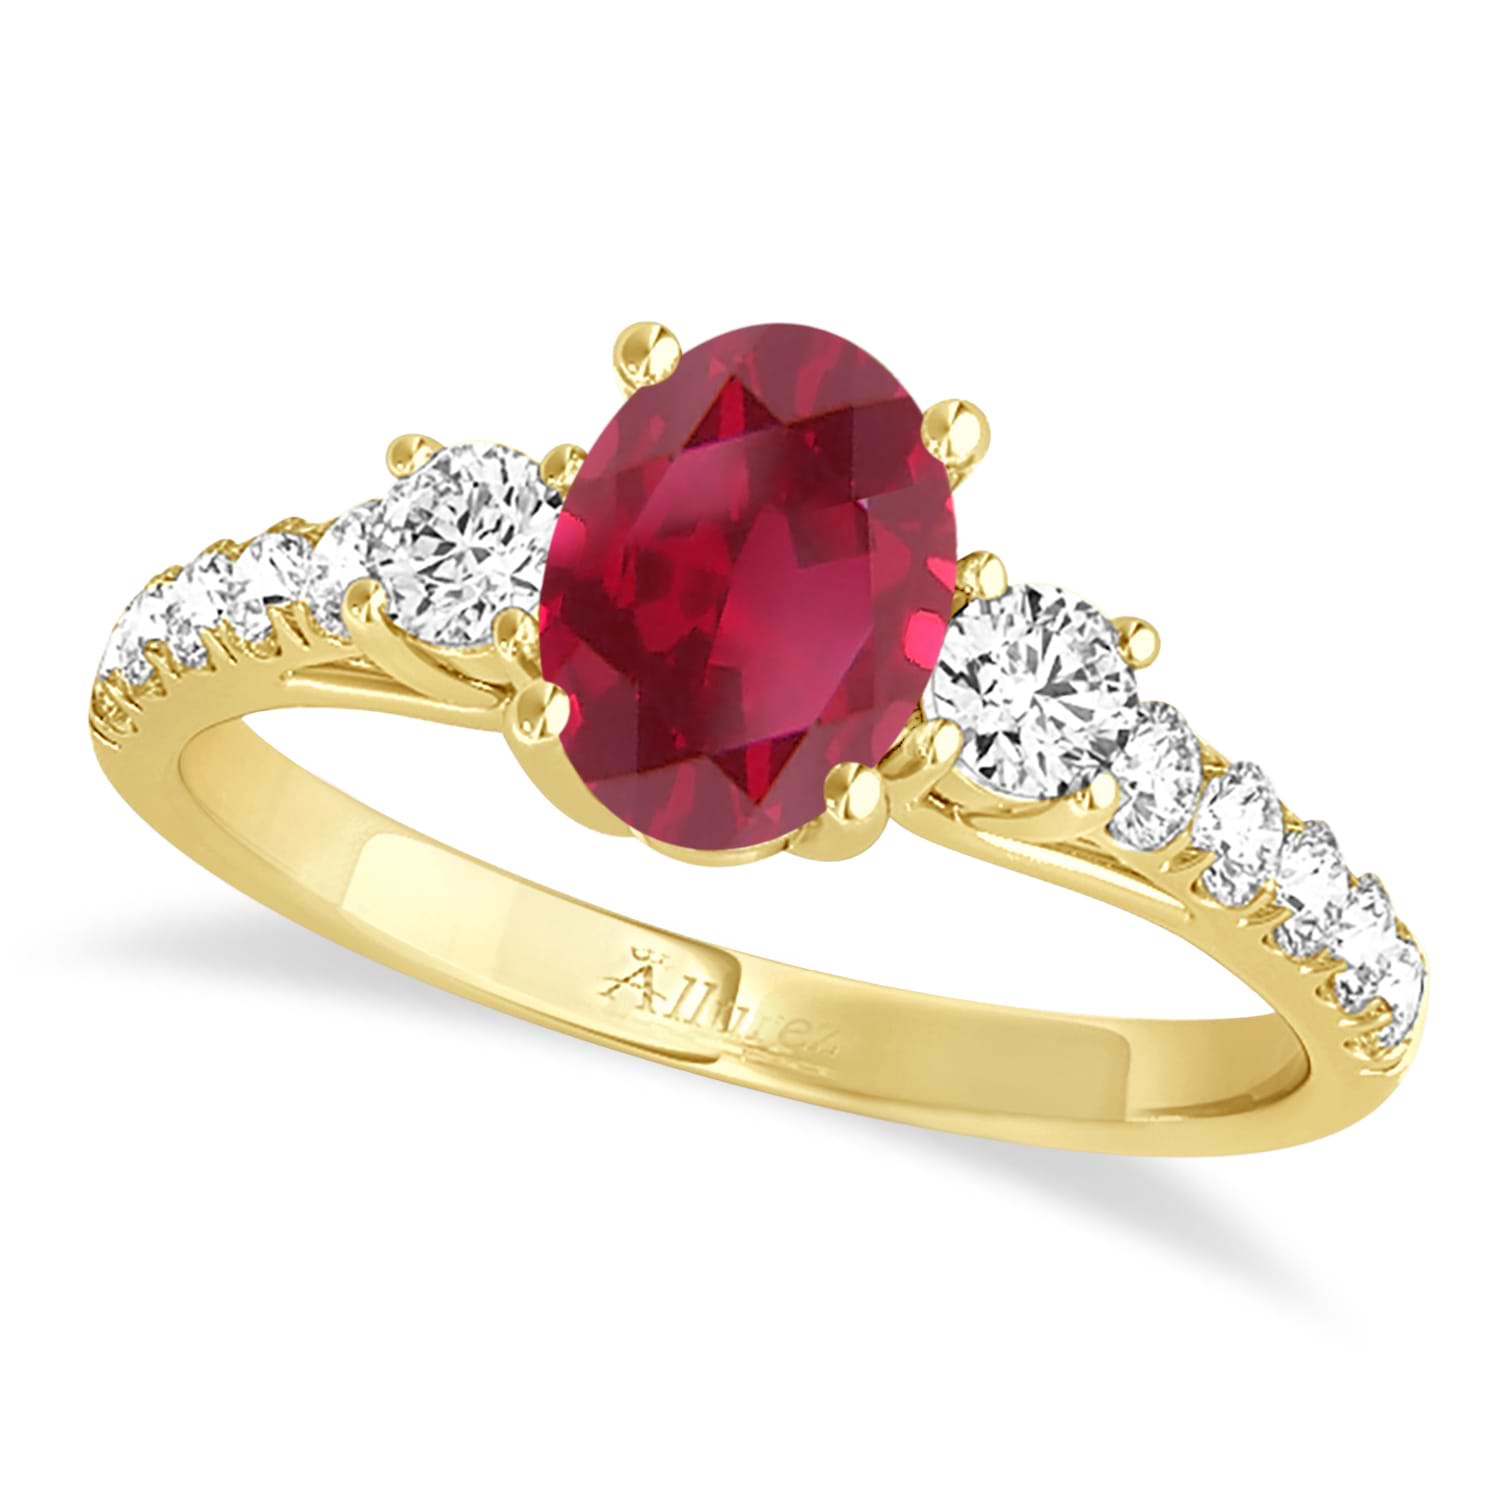 Oval Cut Ruby & Diamond Engagement Ring 14k Yellow Gold (1.40ct)